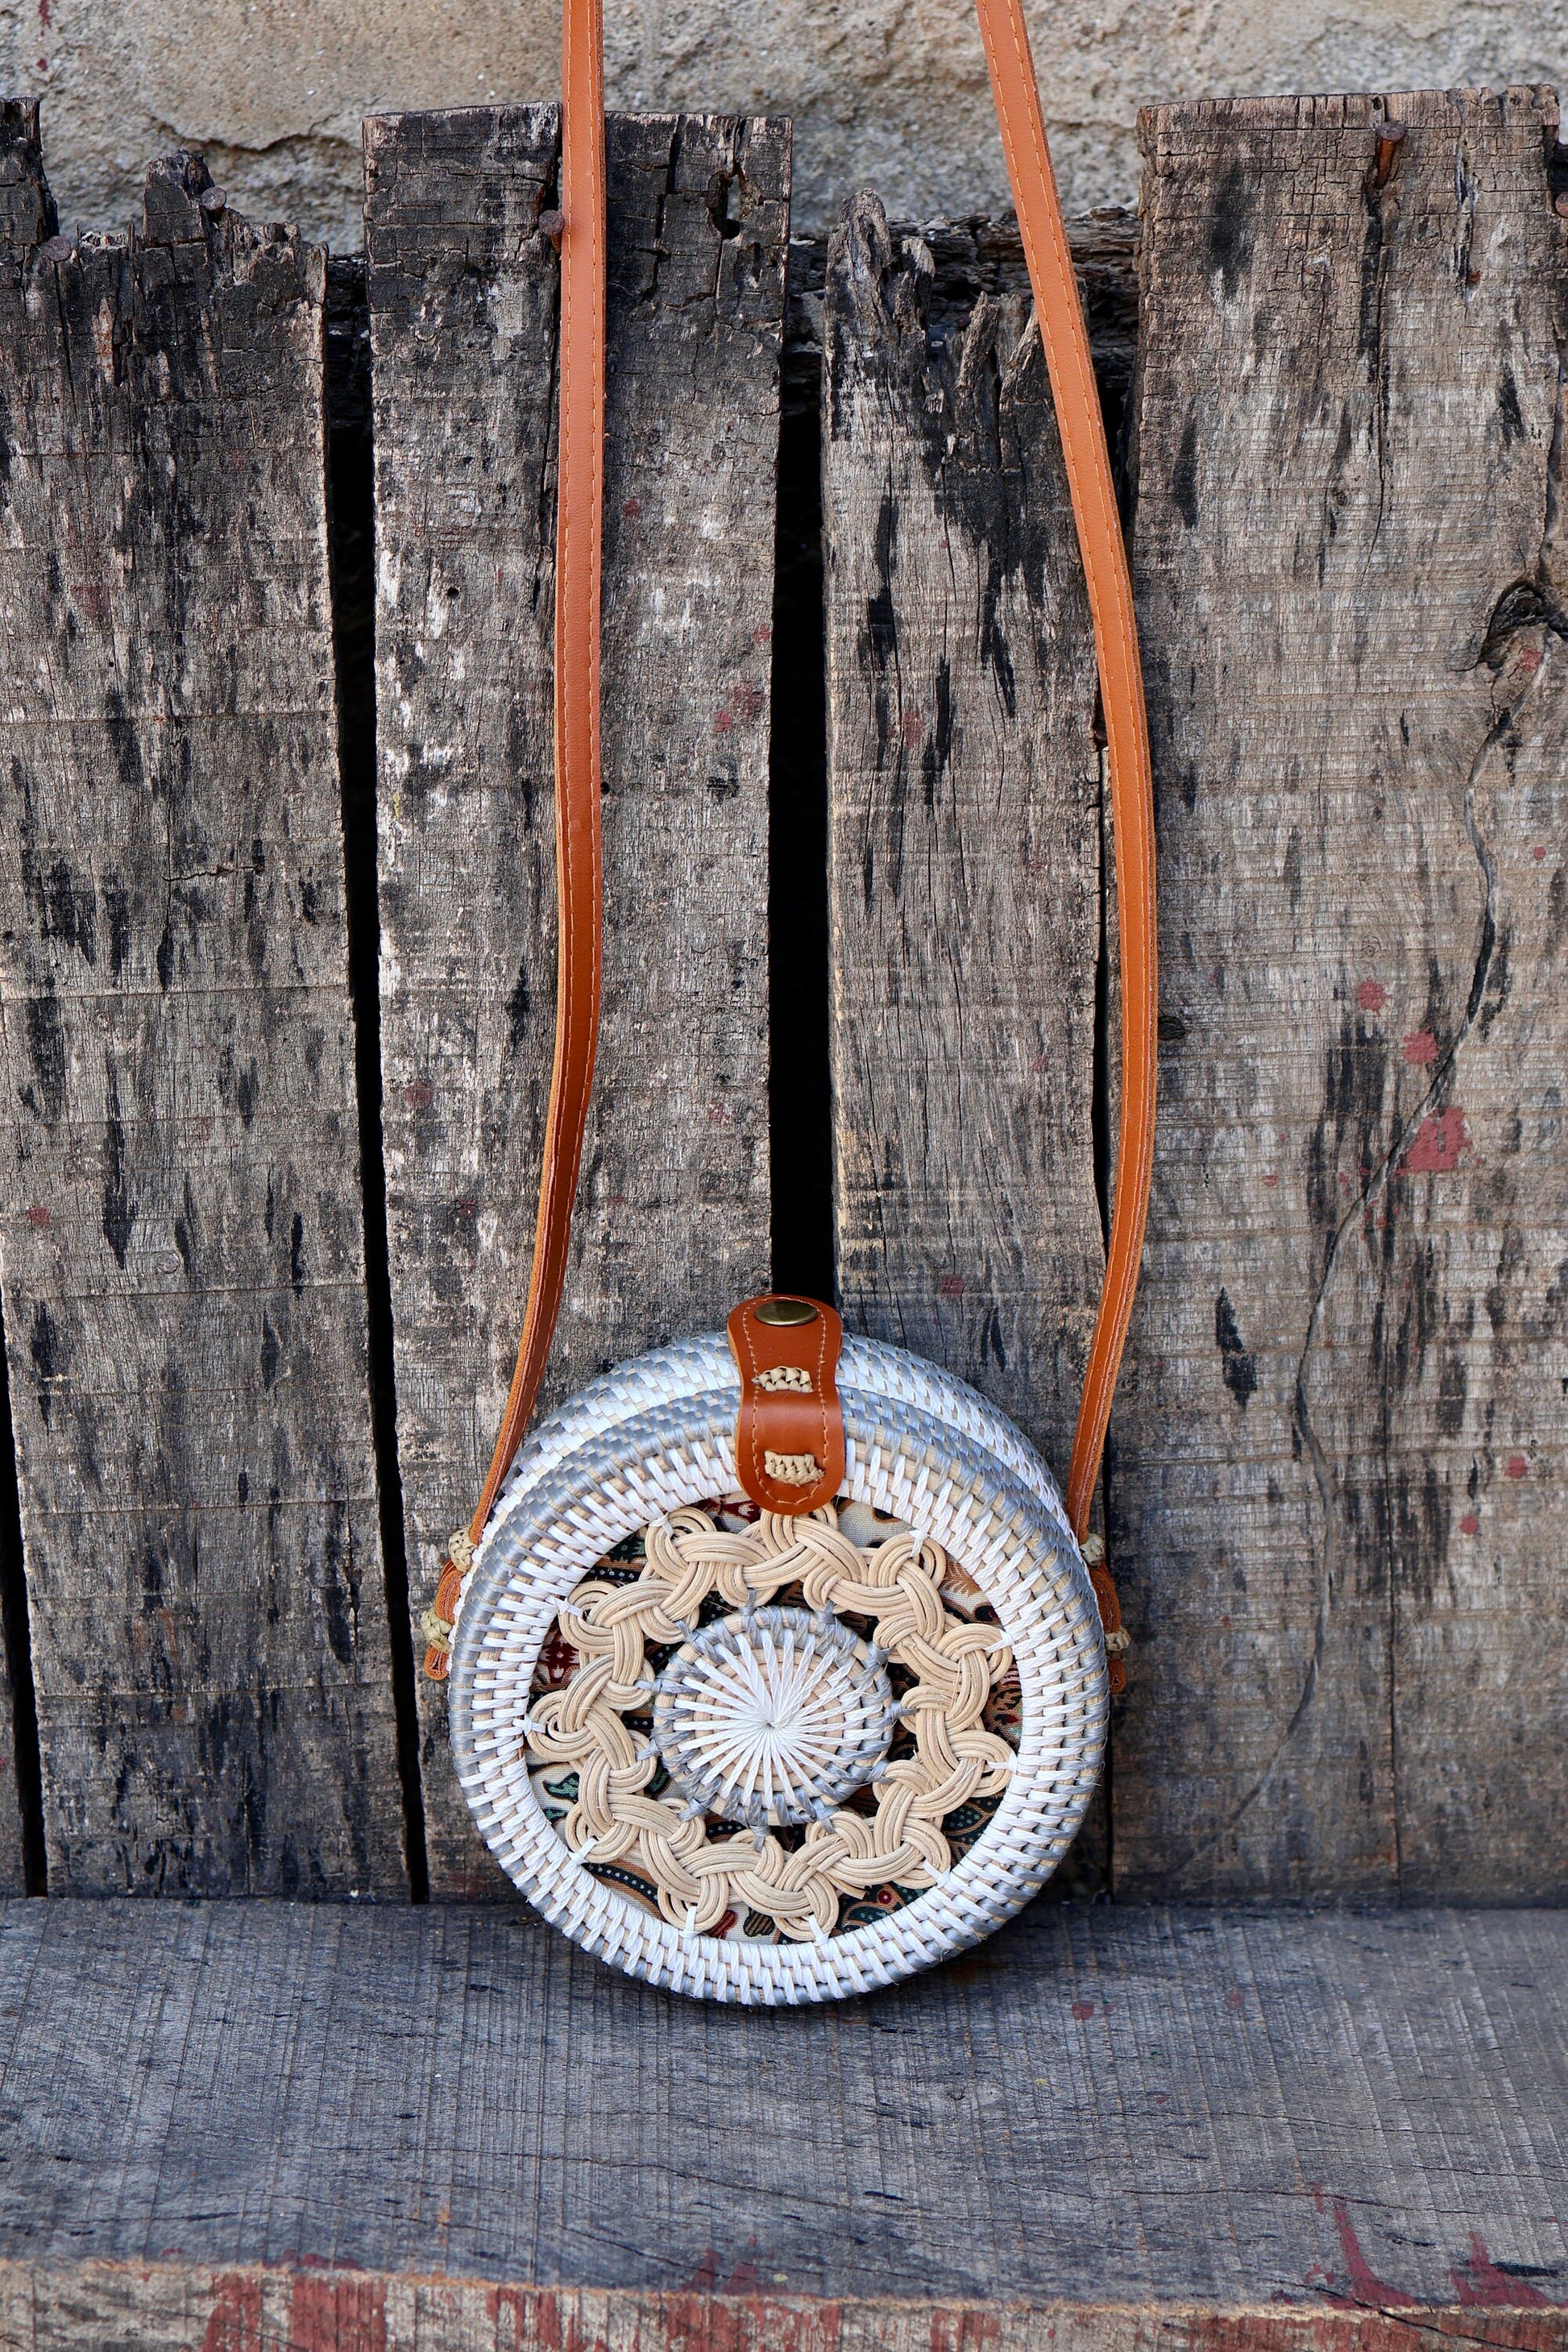 Round Rattan Bag with Braid Pattern, Bali Bags, Handwoven Crossbody Purse, Braided Straw Bag, Bali Sling Bags Rattan Bags Gift for her